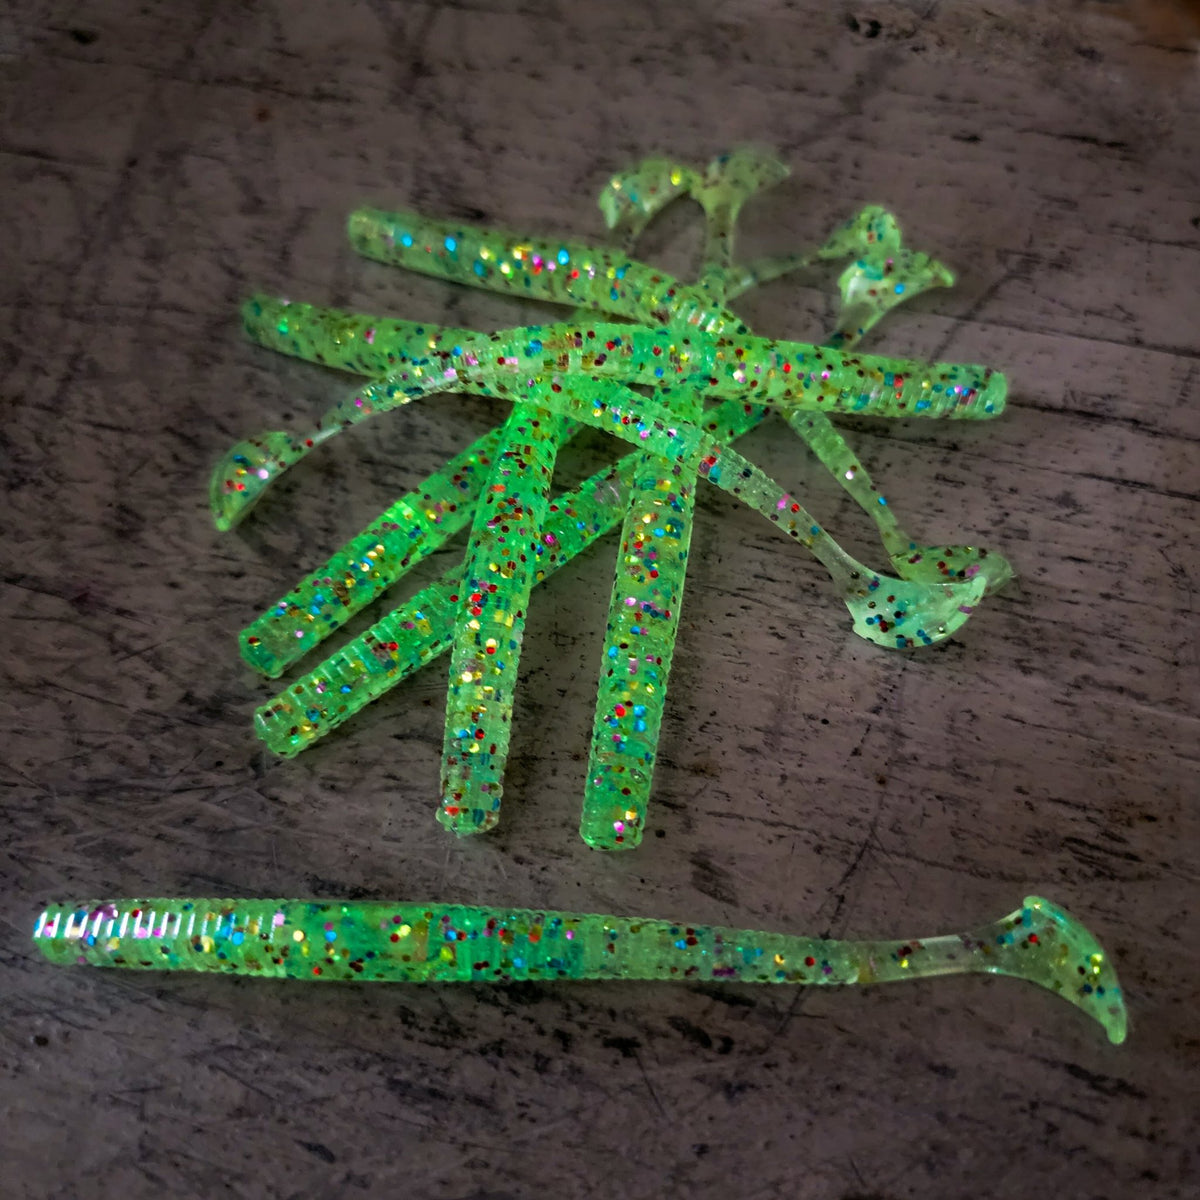 Glow-In-The-Dark Trout 4 Fish Stick (8 pk)